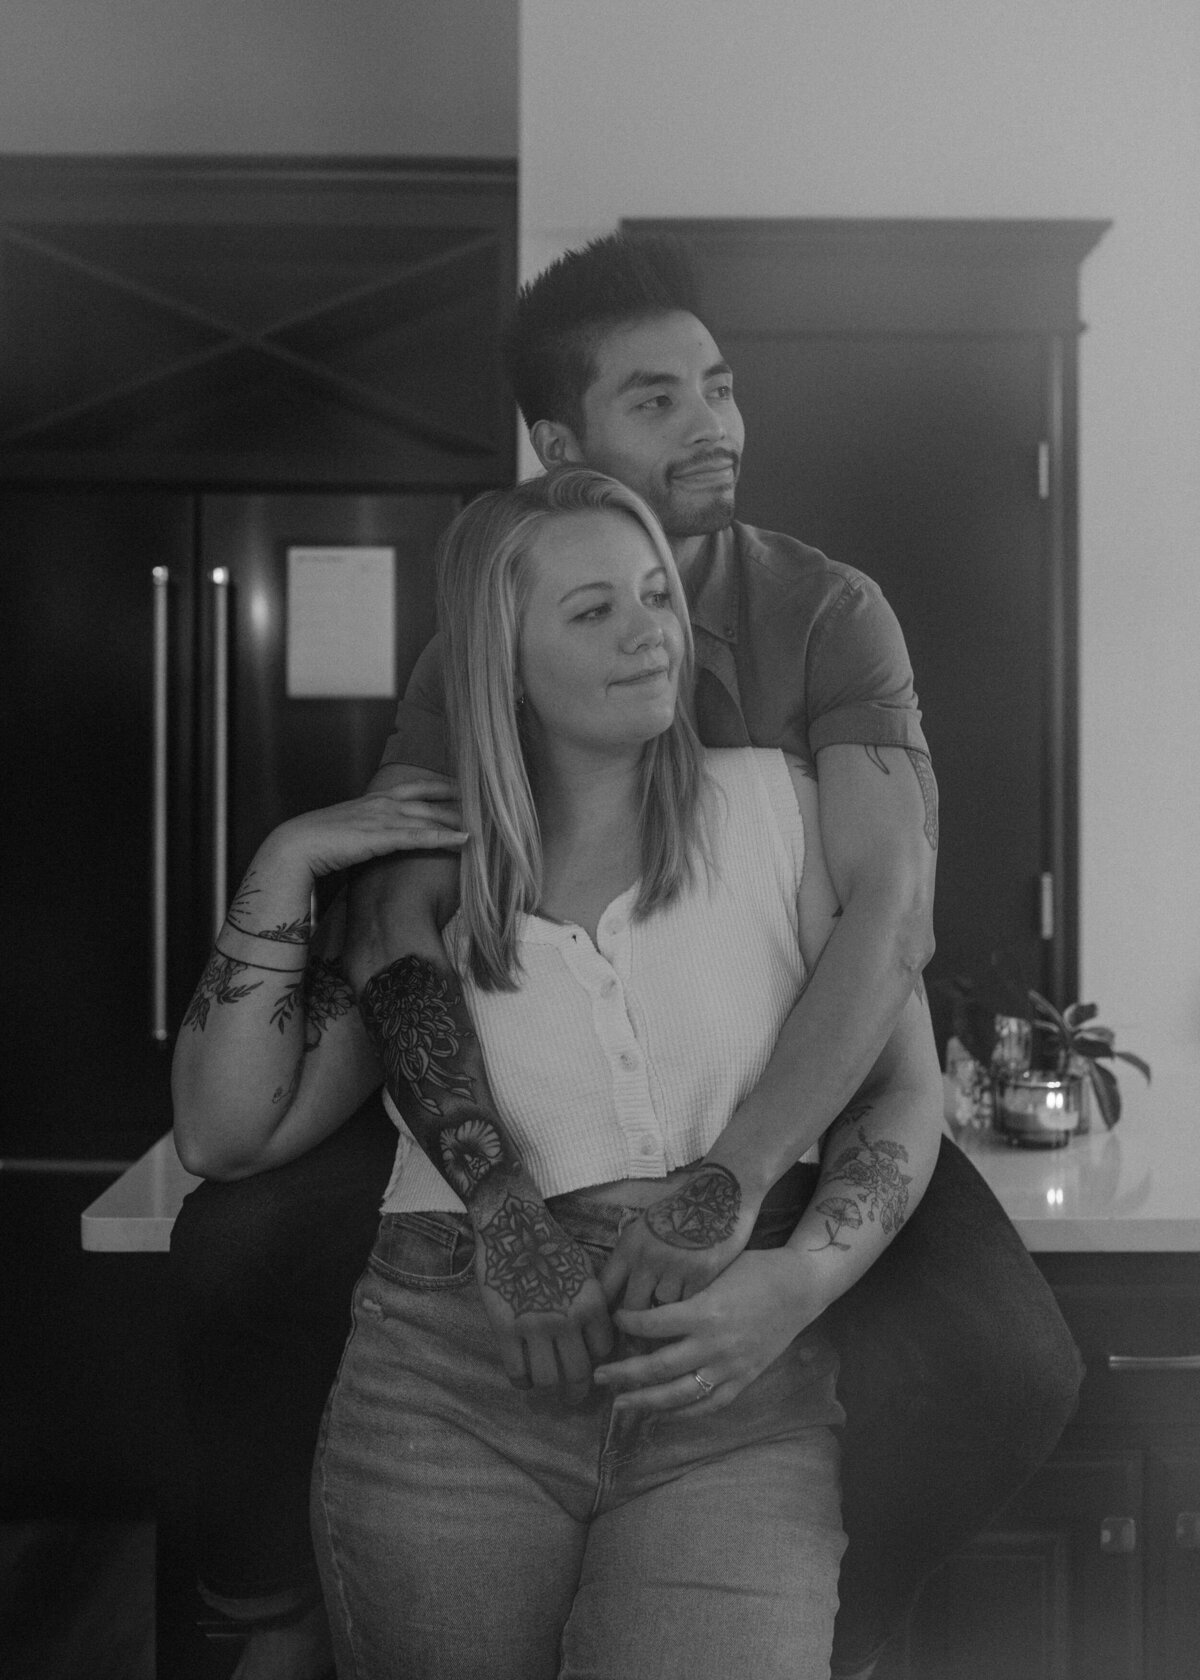 Black and white image of a couple embracing in a kitchen, with the person behind resting their chin on the other's shoulder